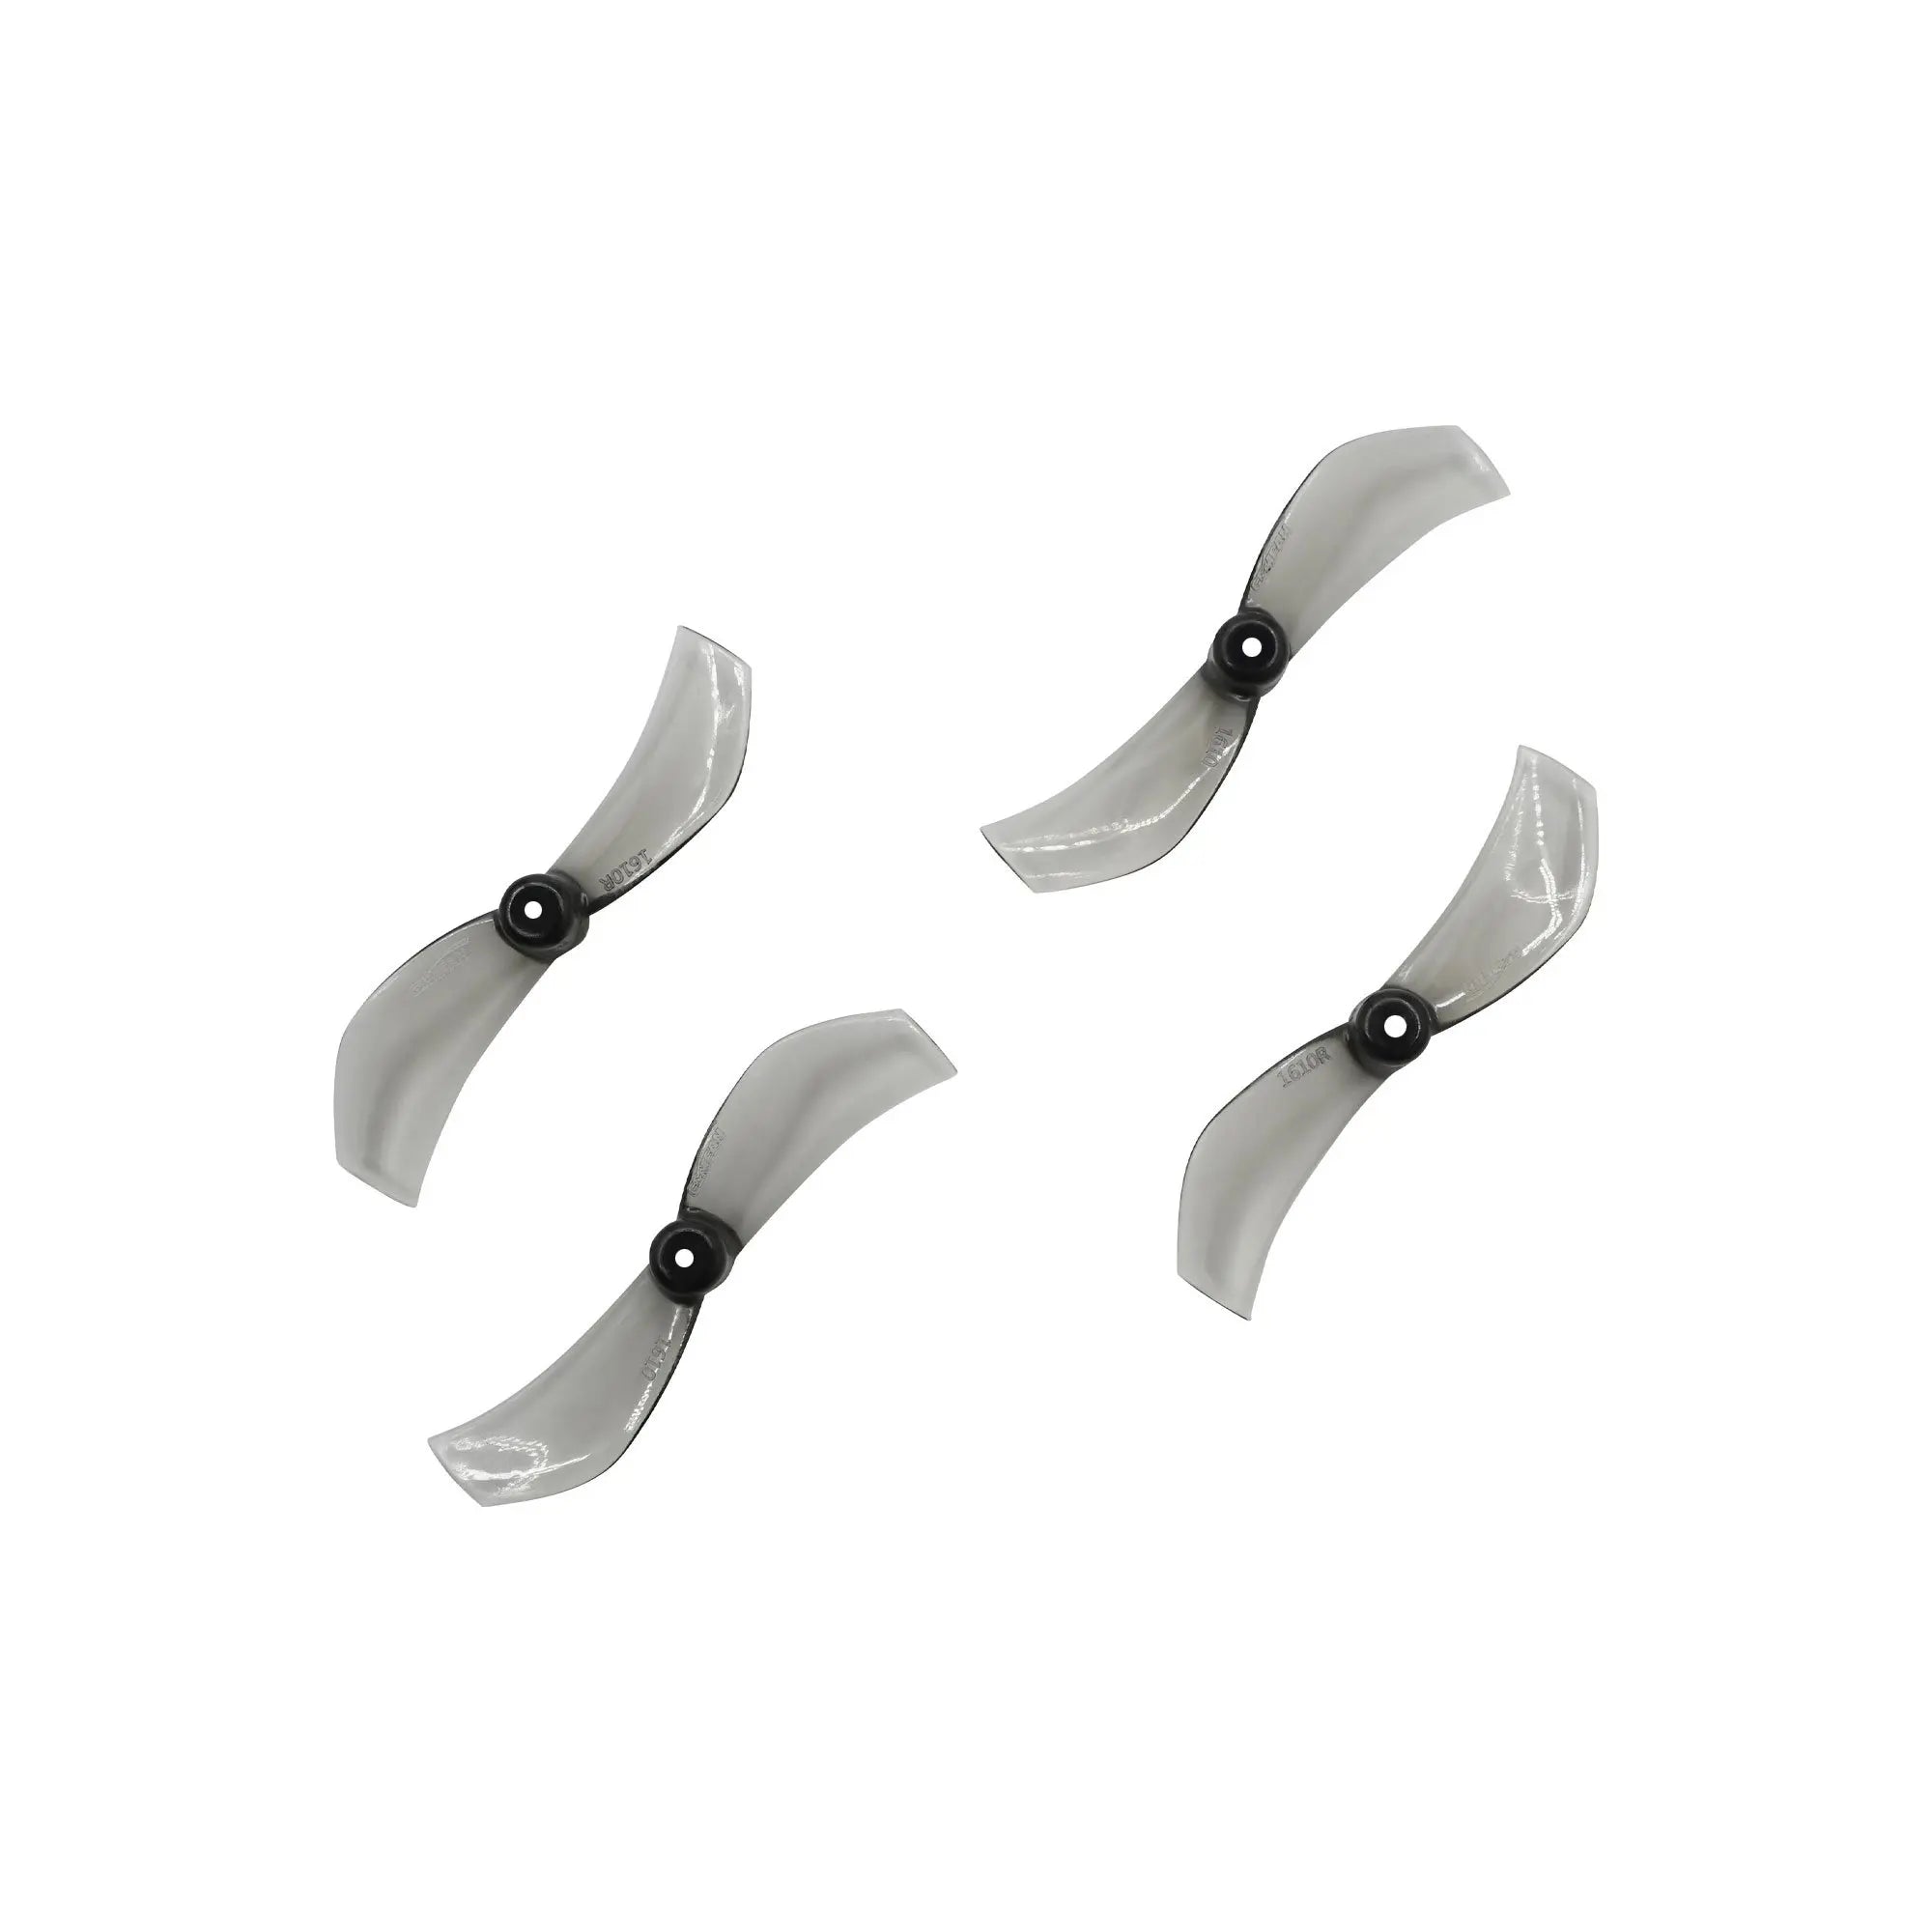 Gemfan 1610-2 Propellers Suitable for quadcopter: smart1610 